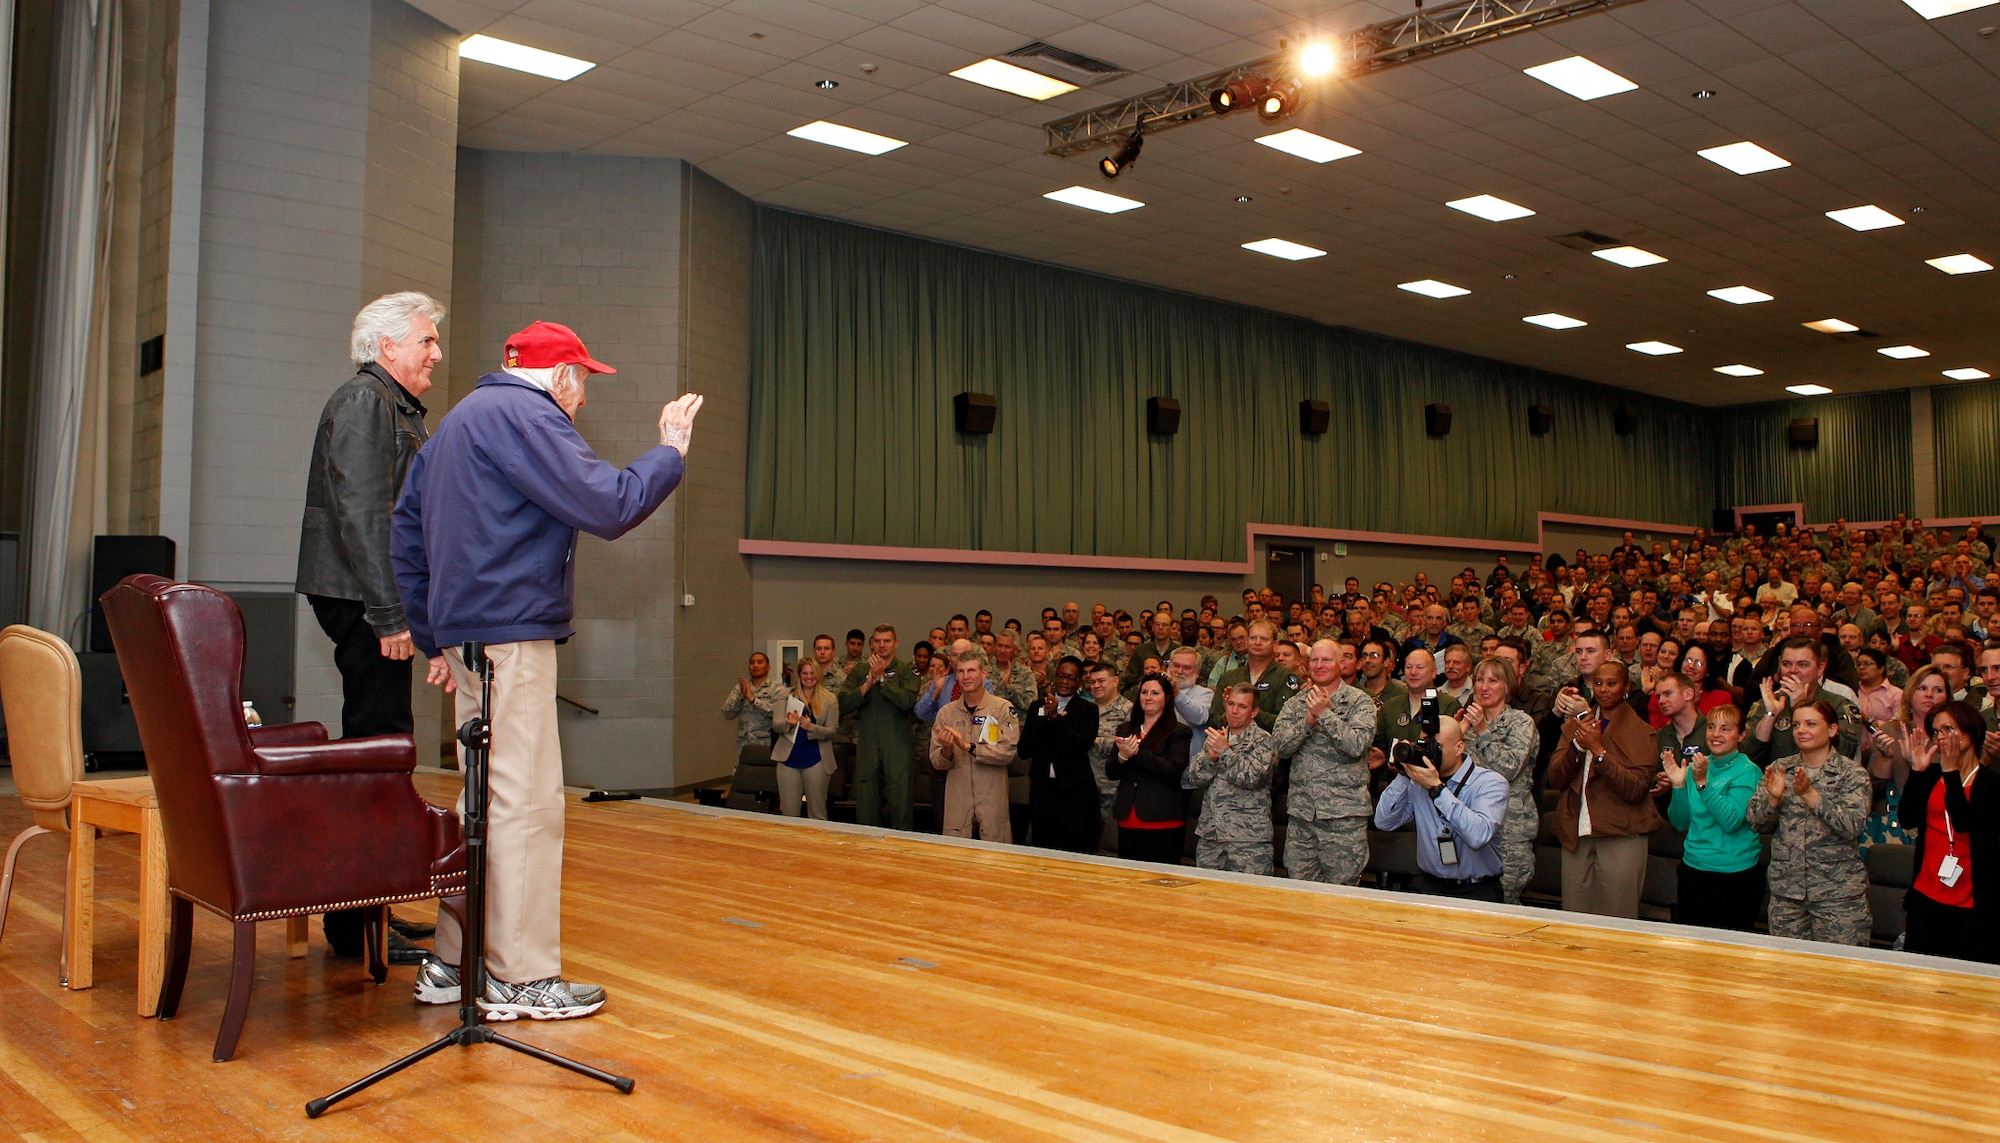 Louis Zamperini stands with his son, Luke, at the end of his presentation during resiliency training at the Base Theater, Dec. 10. (U.S. Air Force photo by Jet Fabara)